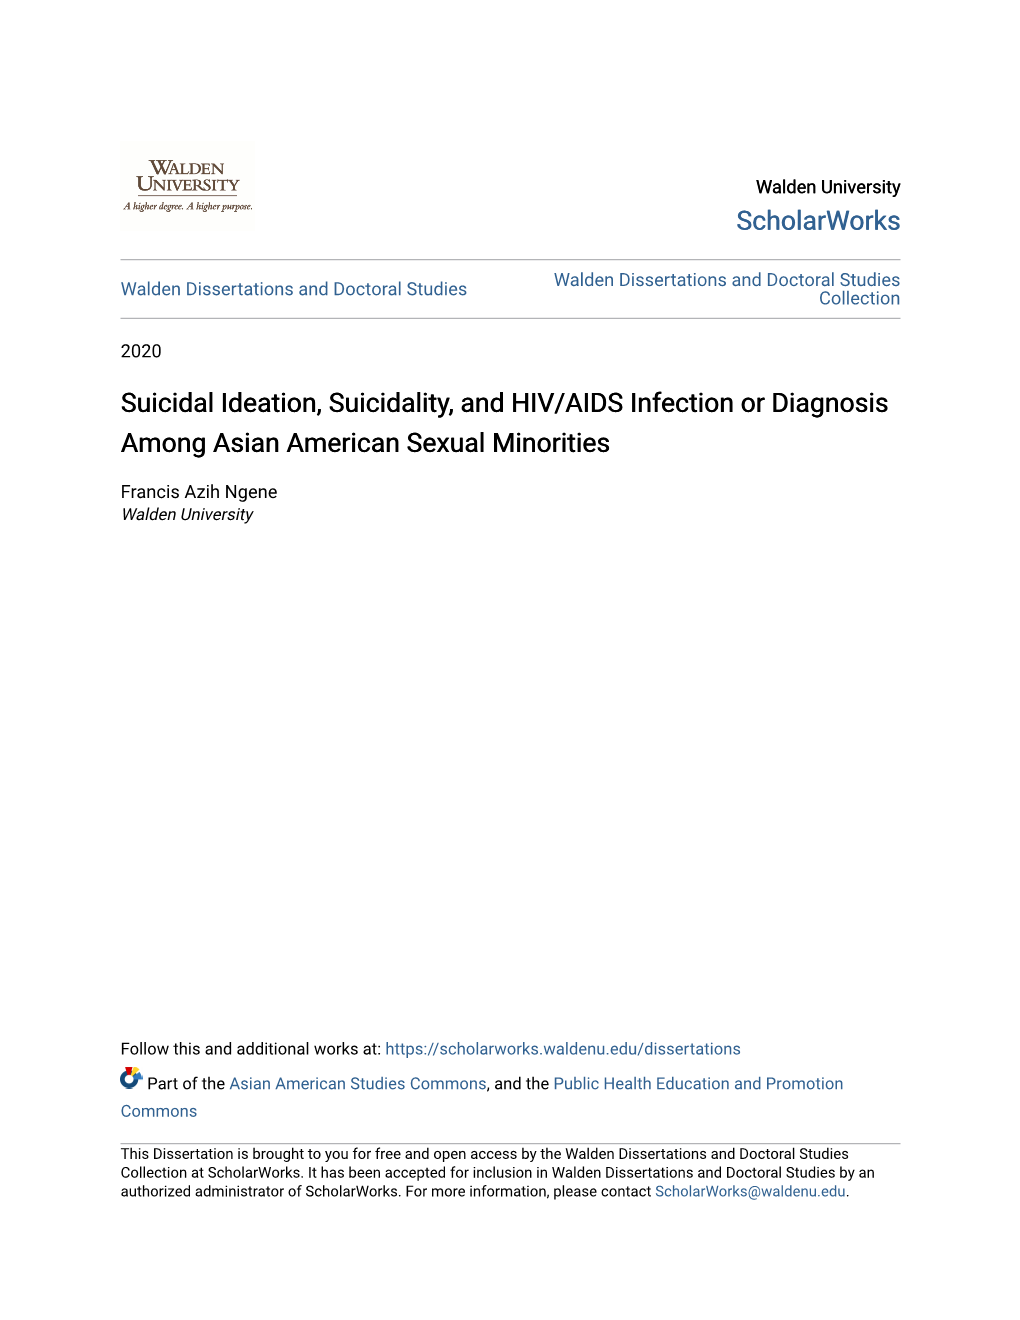 Suicidal Ideation, Suicidality, and HIV/AIDS Infection Or Diagnosis Among Asian American Sexual Minorities